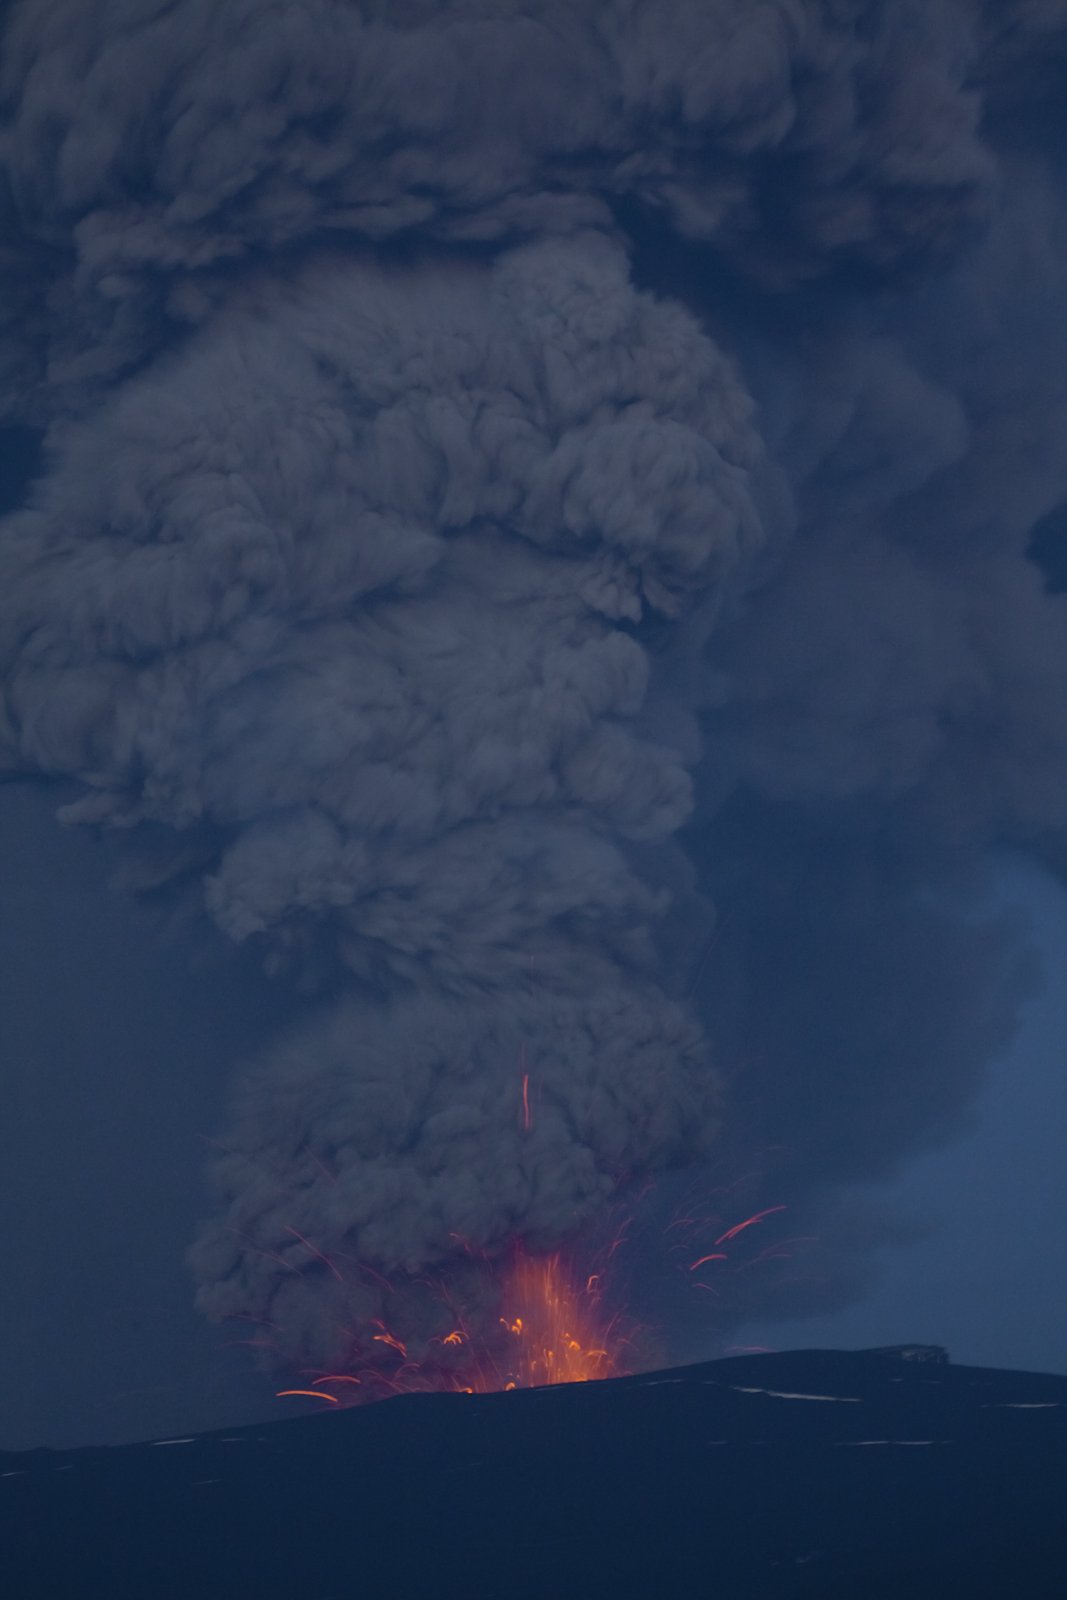 "Eruption in Eyjafjallajökull," by Finnur Malmquist | License: CC BY-NC-ND 2.0